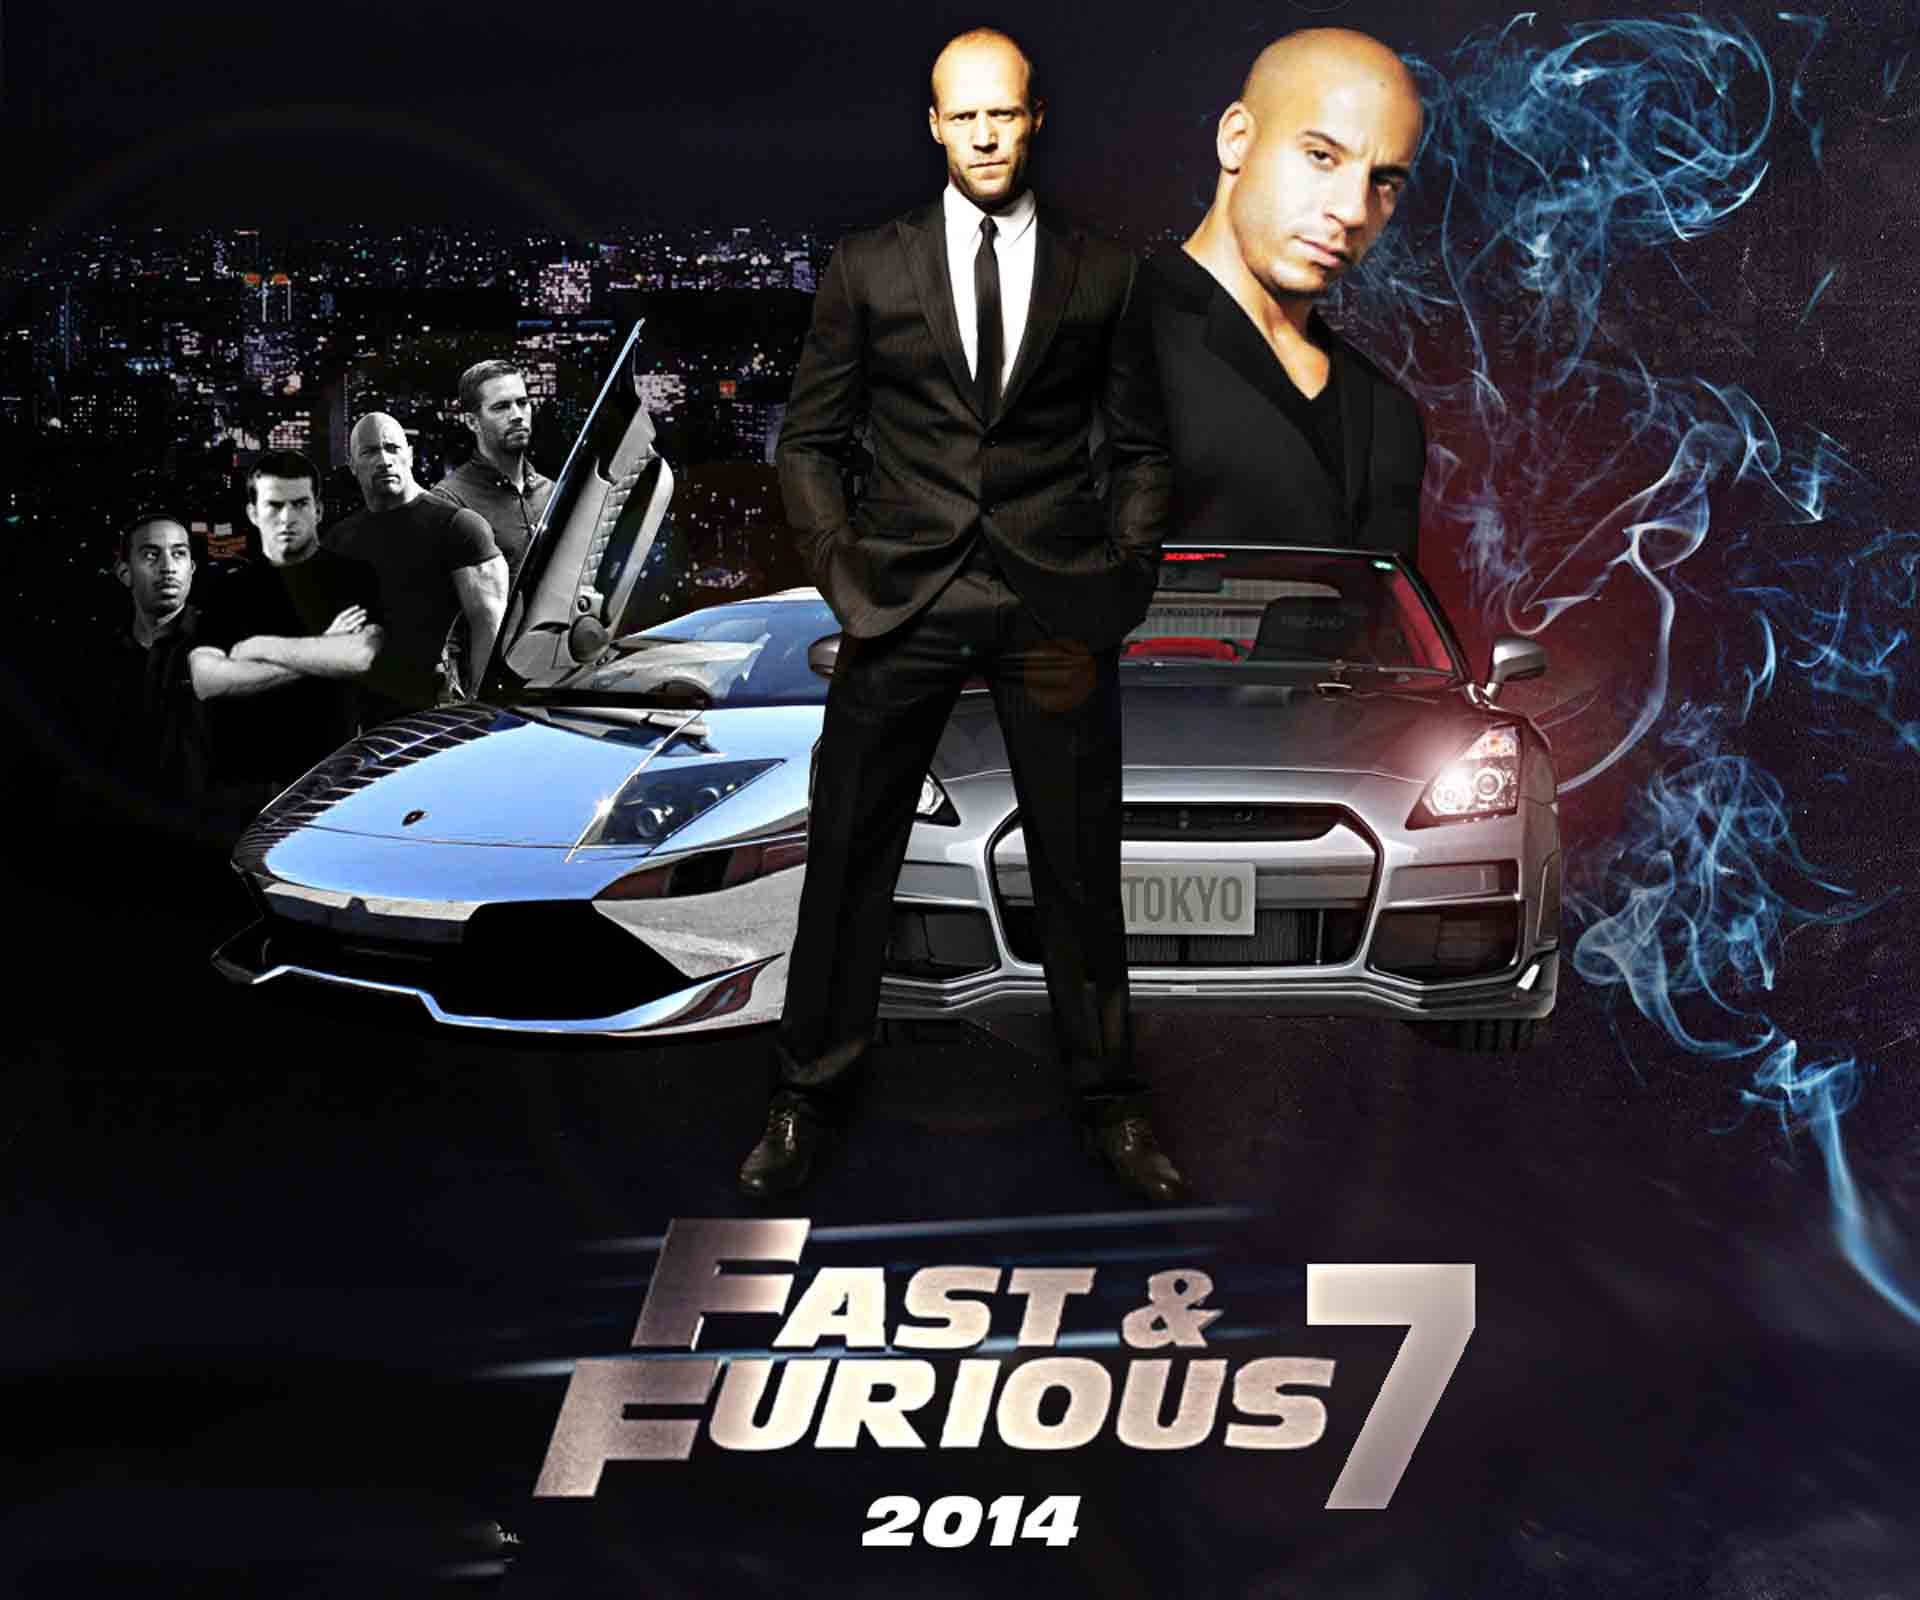 Fast And Furious Promotional Movie Poster Background